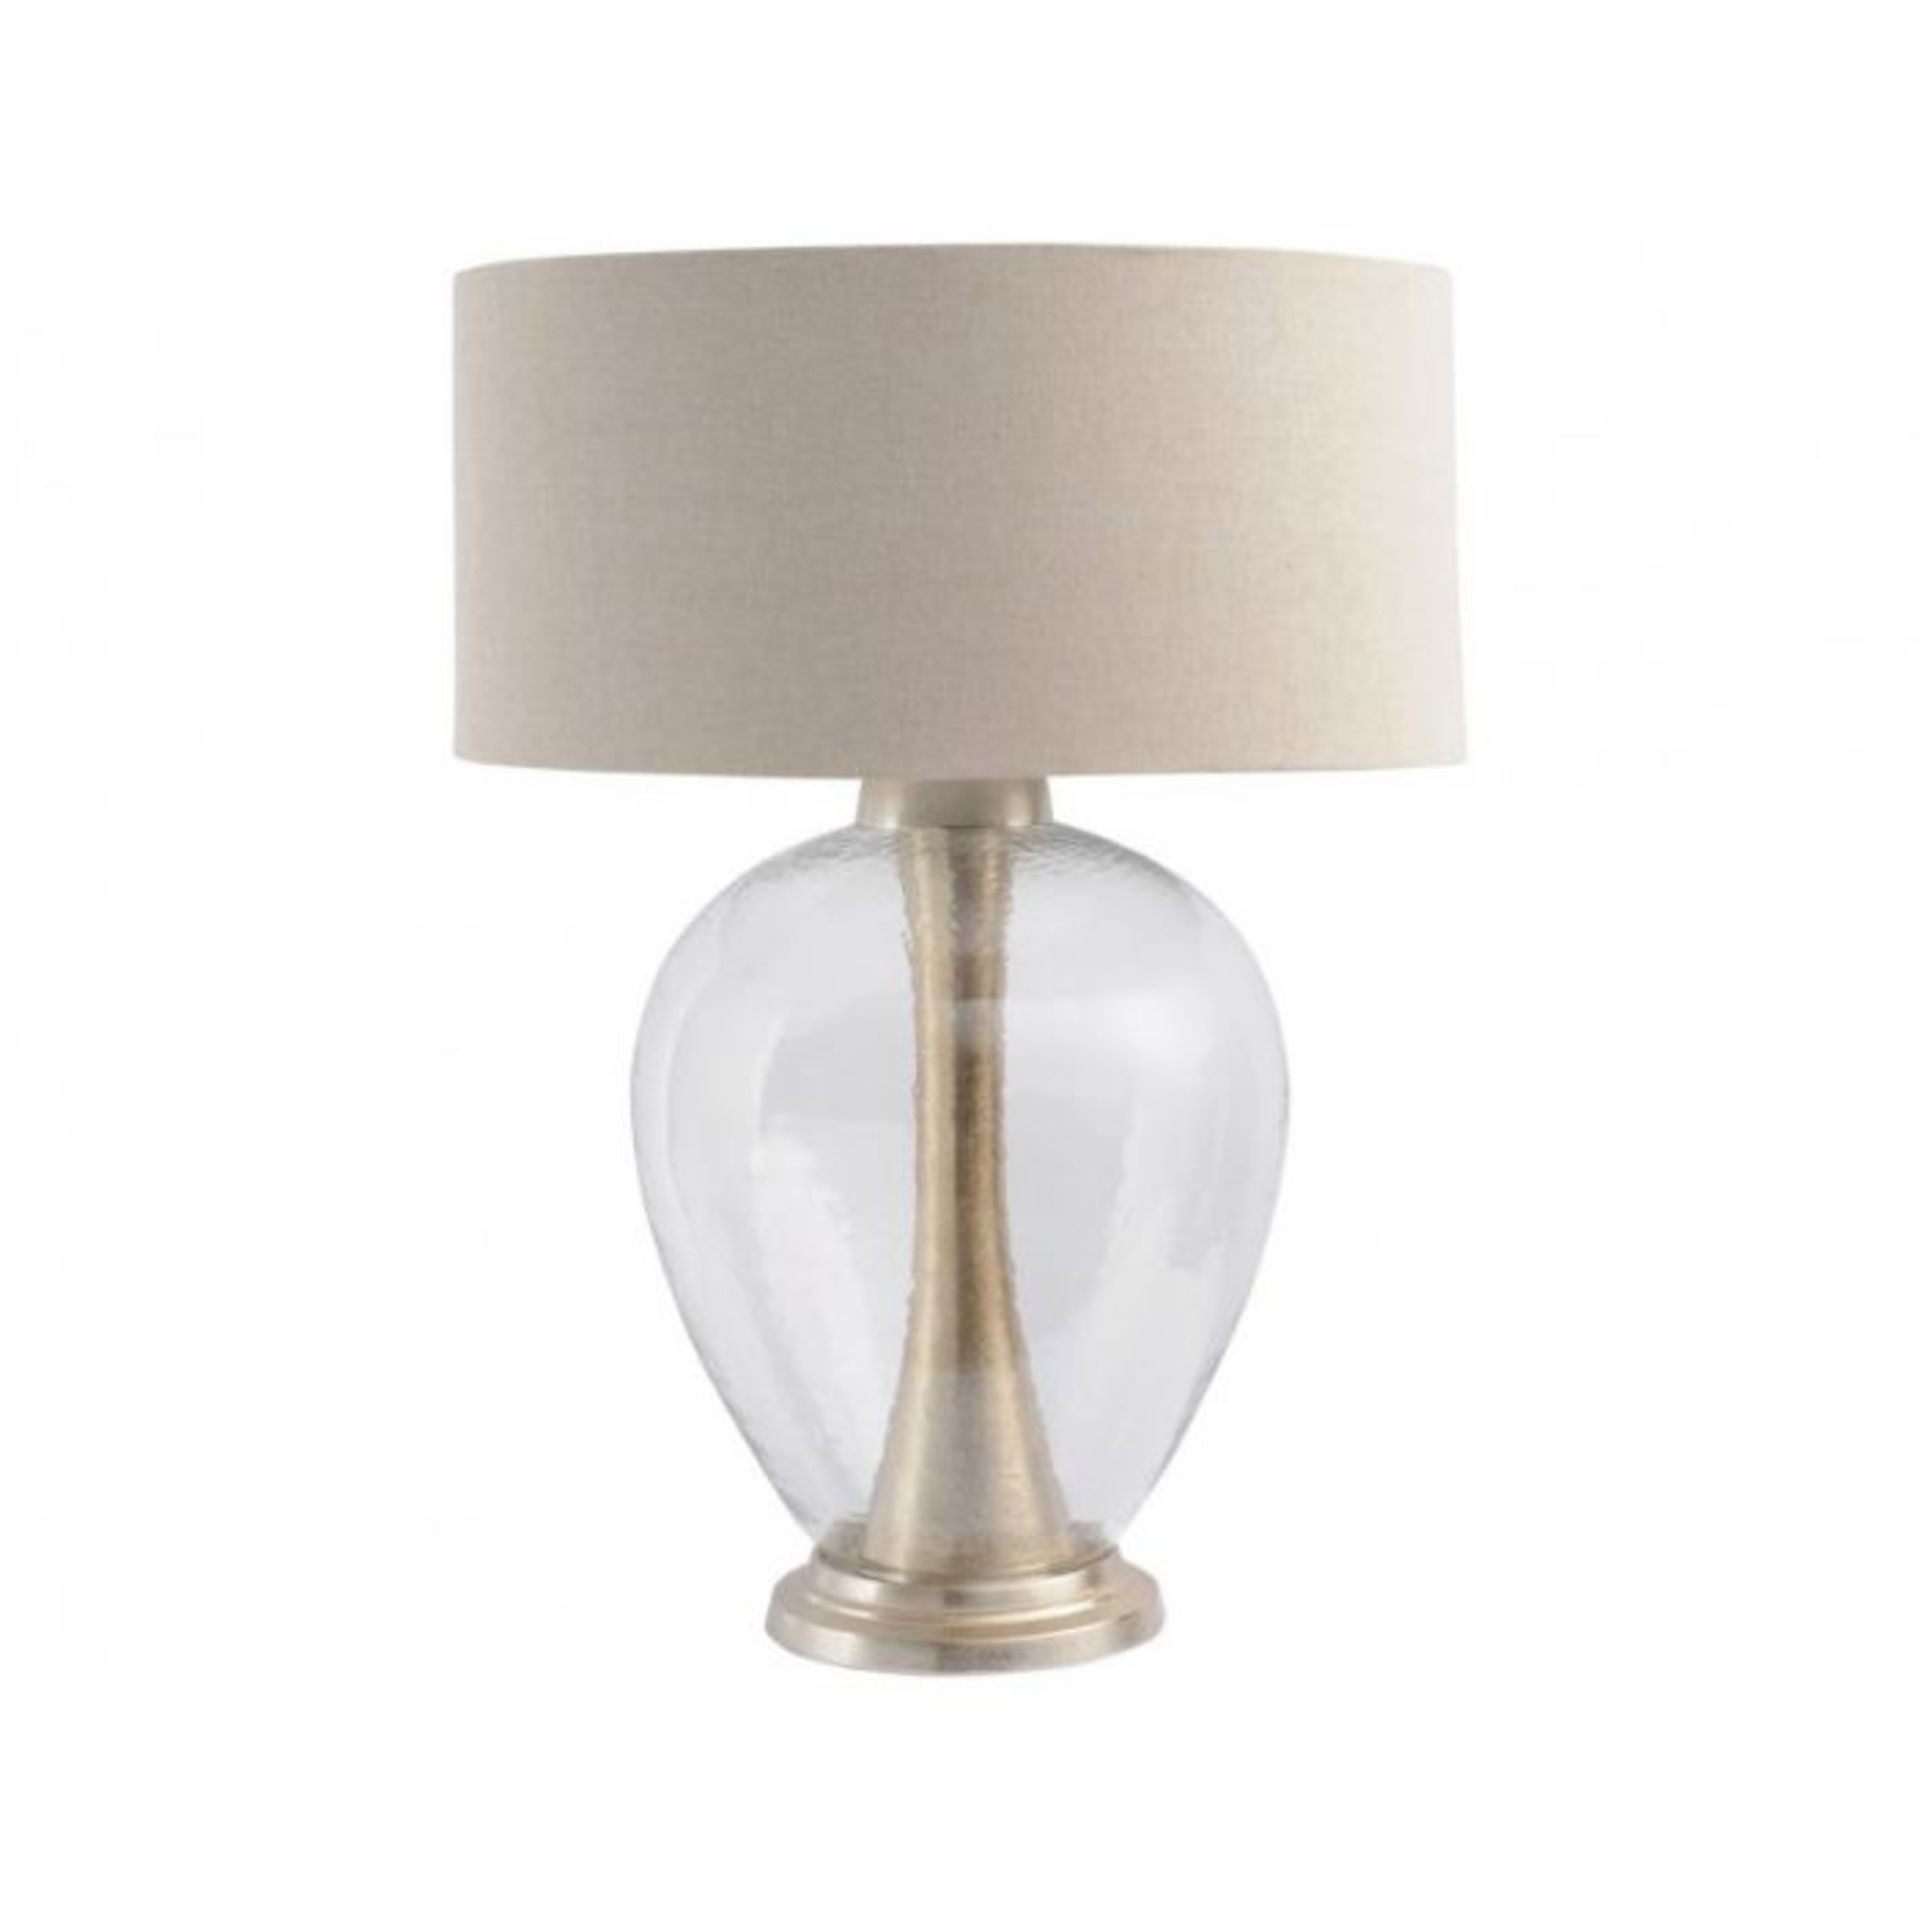 Manila Orb Glass Table Lamp Shade (BEIGE) (50cm) (SHADE ONLY NO BASE) (460/3 -700226pt1)